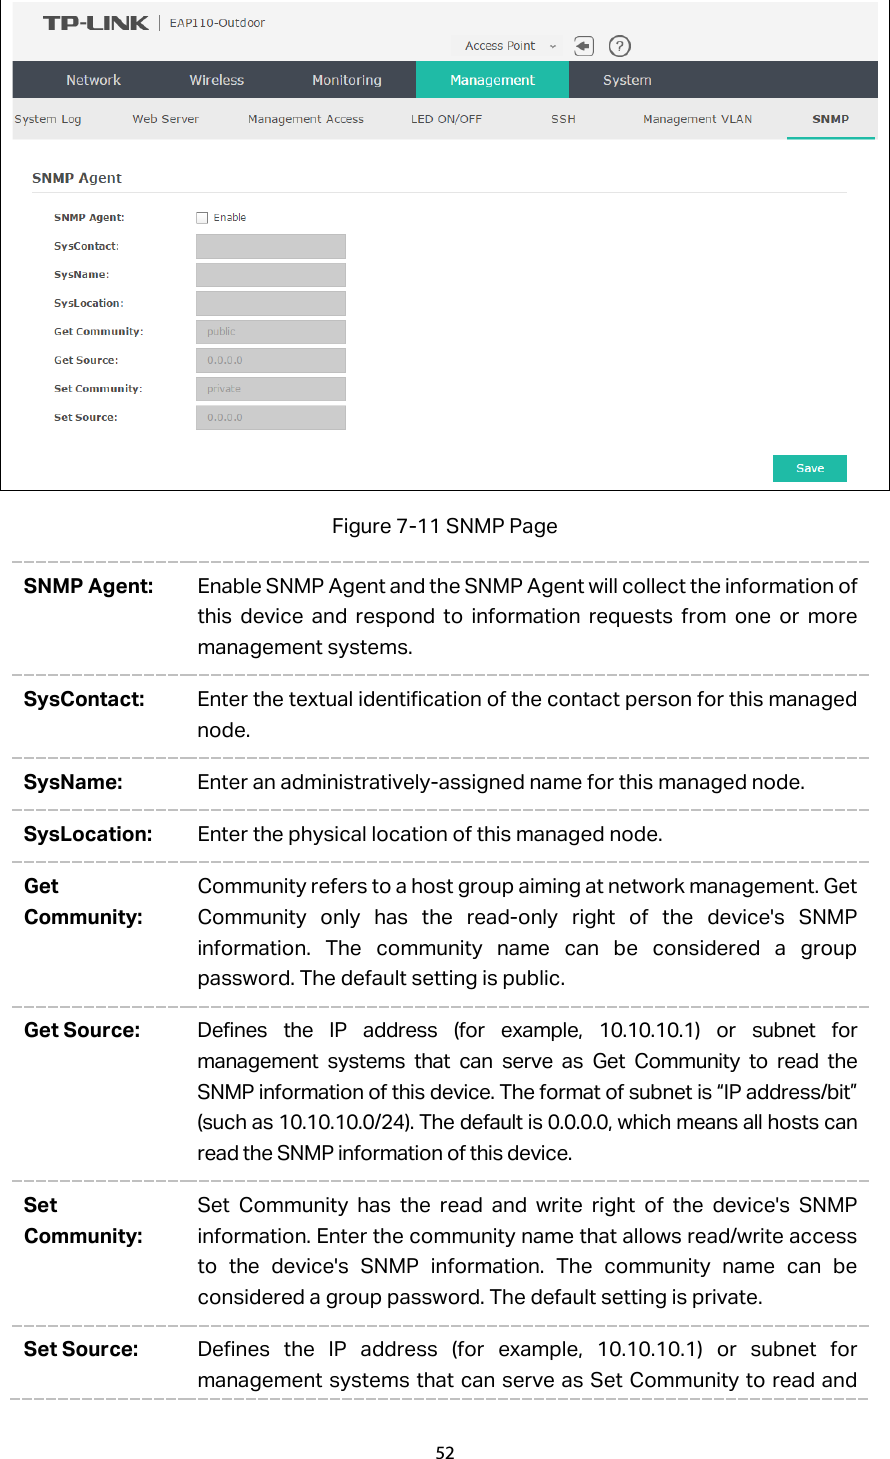  Figure 7-11 SNMP Page SNMP Agent: Enable SNMP Agent and the SNMP Agent will collect the information of this device and respond to information requests from one or more management systems. SysContact: Enter the textual identification of the contact person for this managed node. SysName: Enter an administratively-assigned name for this managed node. SysLocation: Enter the physical location of this managed node. Get Community: Community refers to a host group aiming at network management. Get Community only has the read-only right of the device&apos;s SNMP information. The community name can be considered a group password. The default setting is public. Get Source: Defines the IP address (for example, 10.10.10.1) or subnet for management systems that can serve as Get Community to read the SNMP information of this device. The format of subnet is “IP address/bit” (such as 10.10.10.0/24). The default is 0.0.0.0, which means all hosts can read the SNMP information of this device. Set Community: Set Community has the read and write right of the device&apos;s SNMP information. Enter the community name that allows read/write access to the device&apos;s SNMP information. The community name can be considered a group password. The default setting is private. Set Source: Defines the IP address (for example, 10.10.10.1) or subnet for management systems that can serve as Set Community to read and 52  